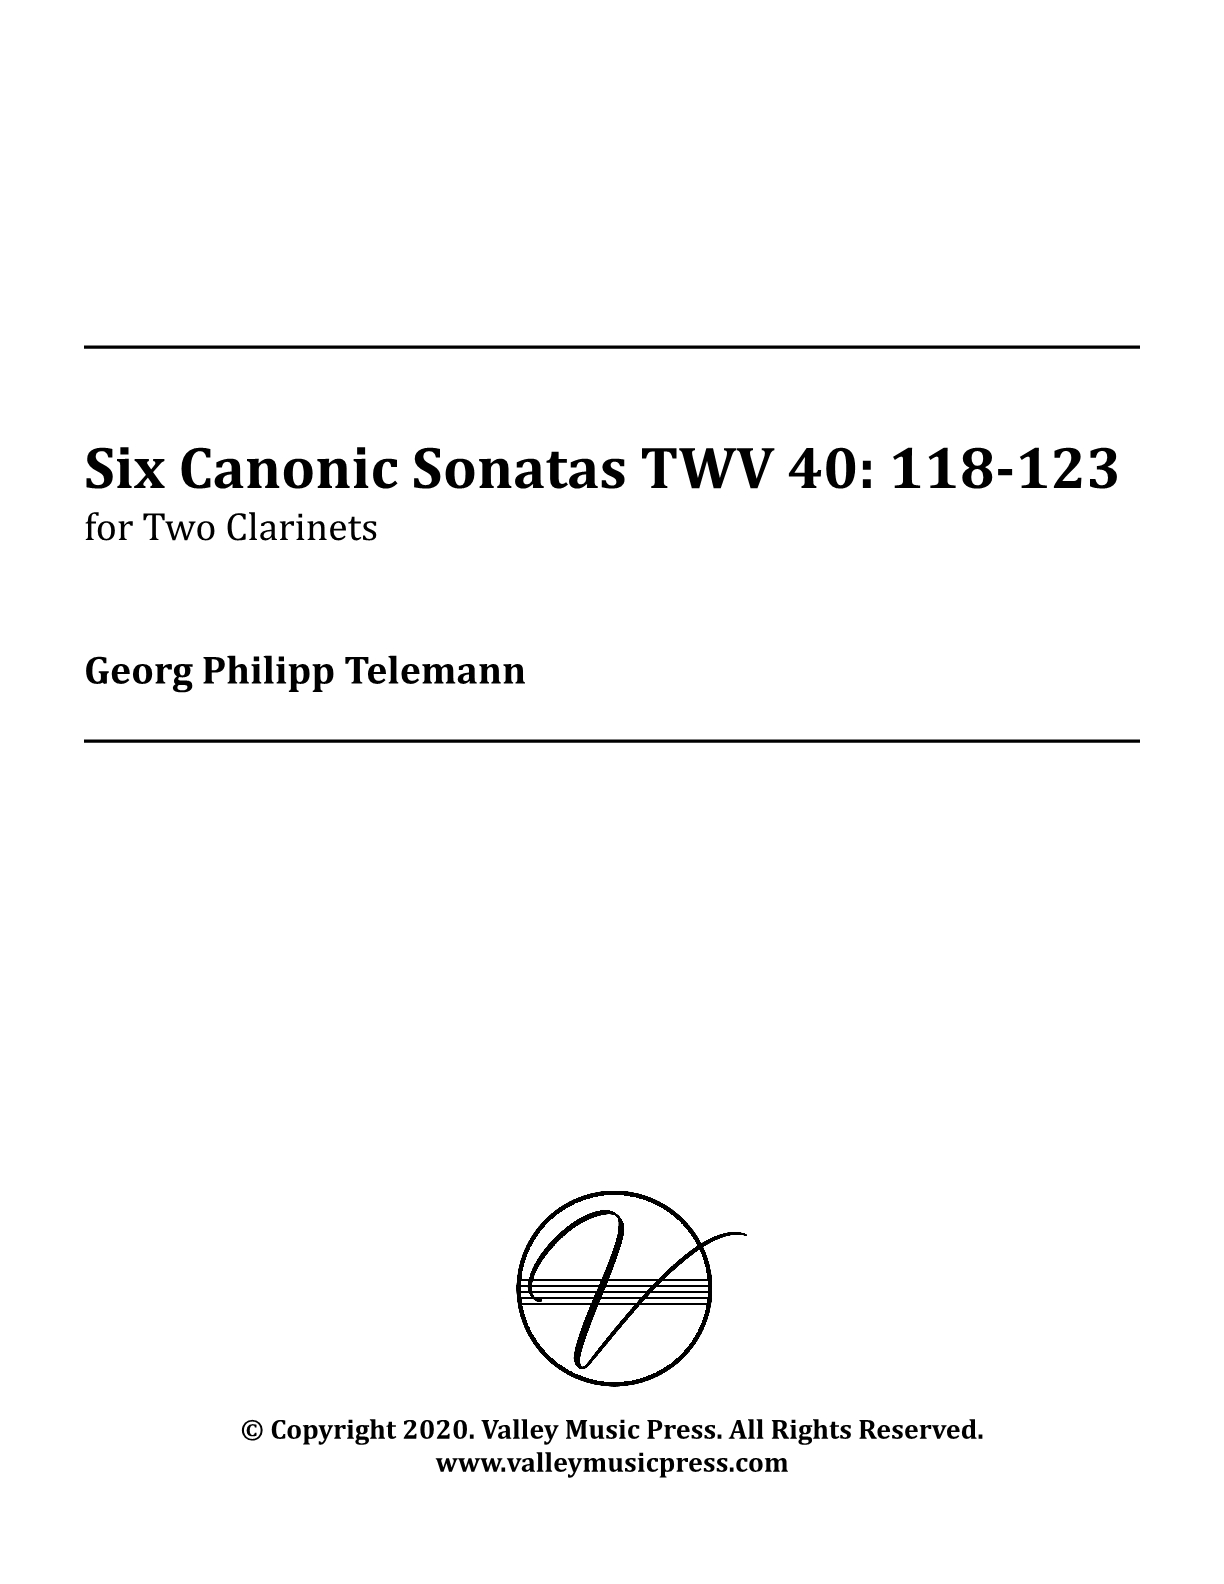 Telemann 6 Canonic Sonatas for clarinet duo duet two clarinets 